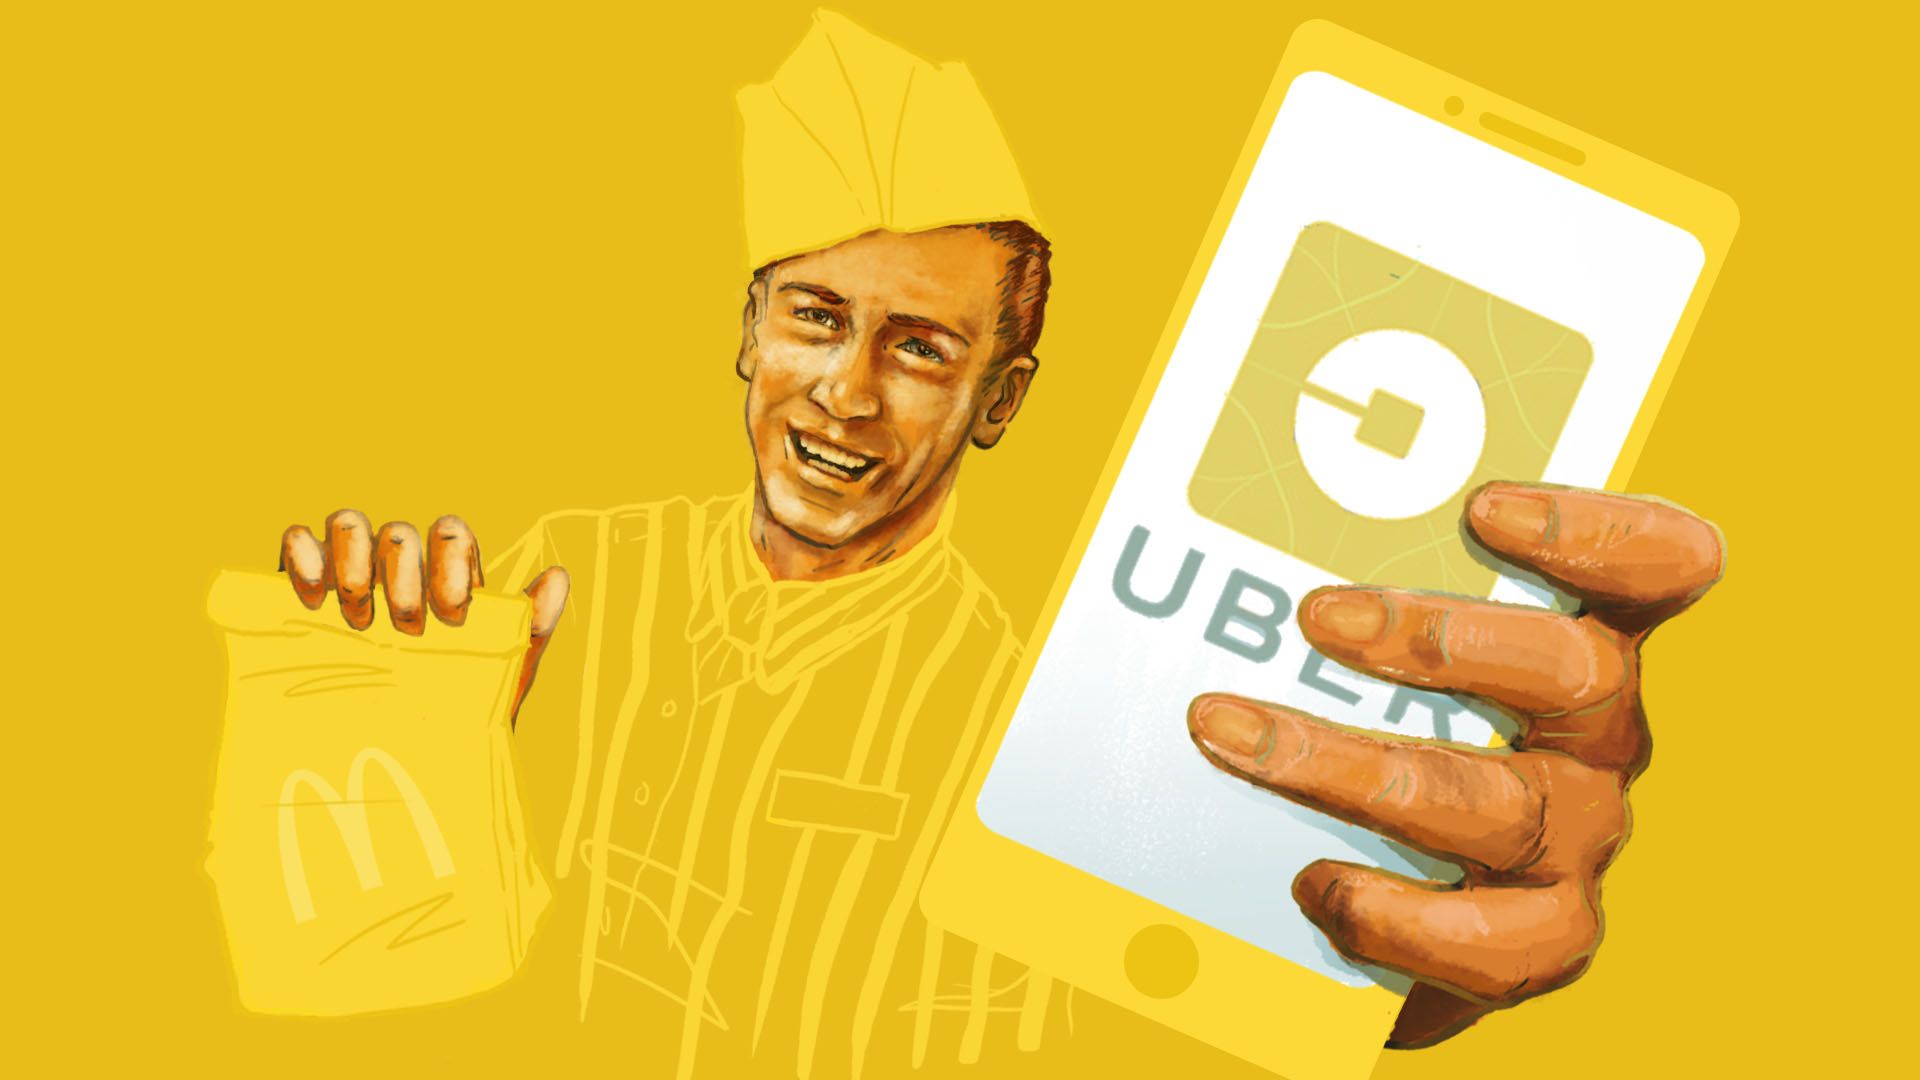 Illustration of man holding a McDonald's bag and a cell phone with the Uber app